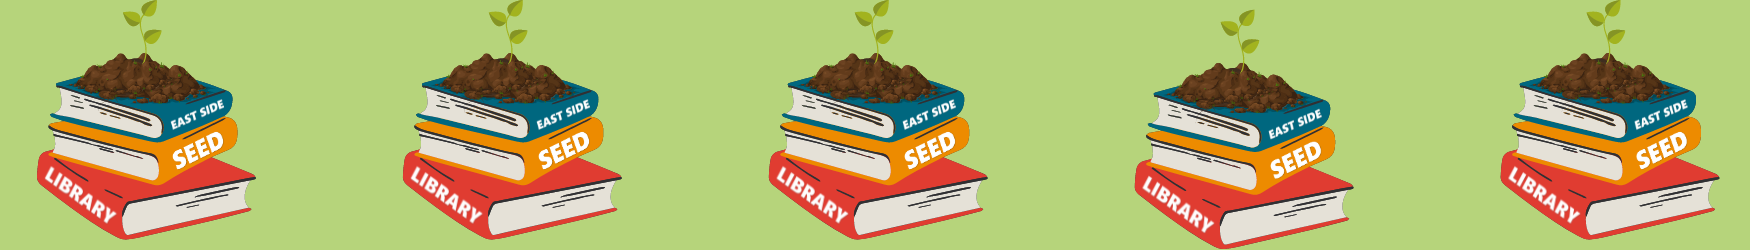 Repeating graphic of a stack of three books with a seedling growing on top. The spines of the books read 